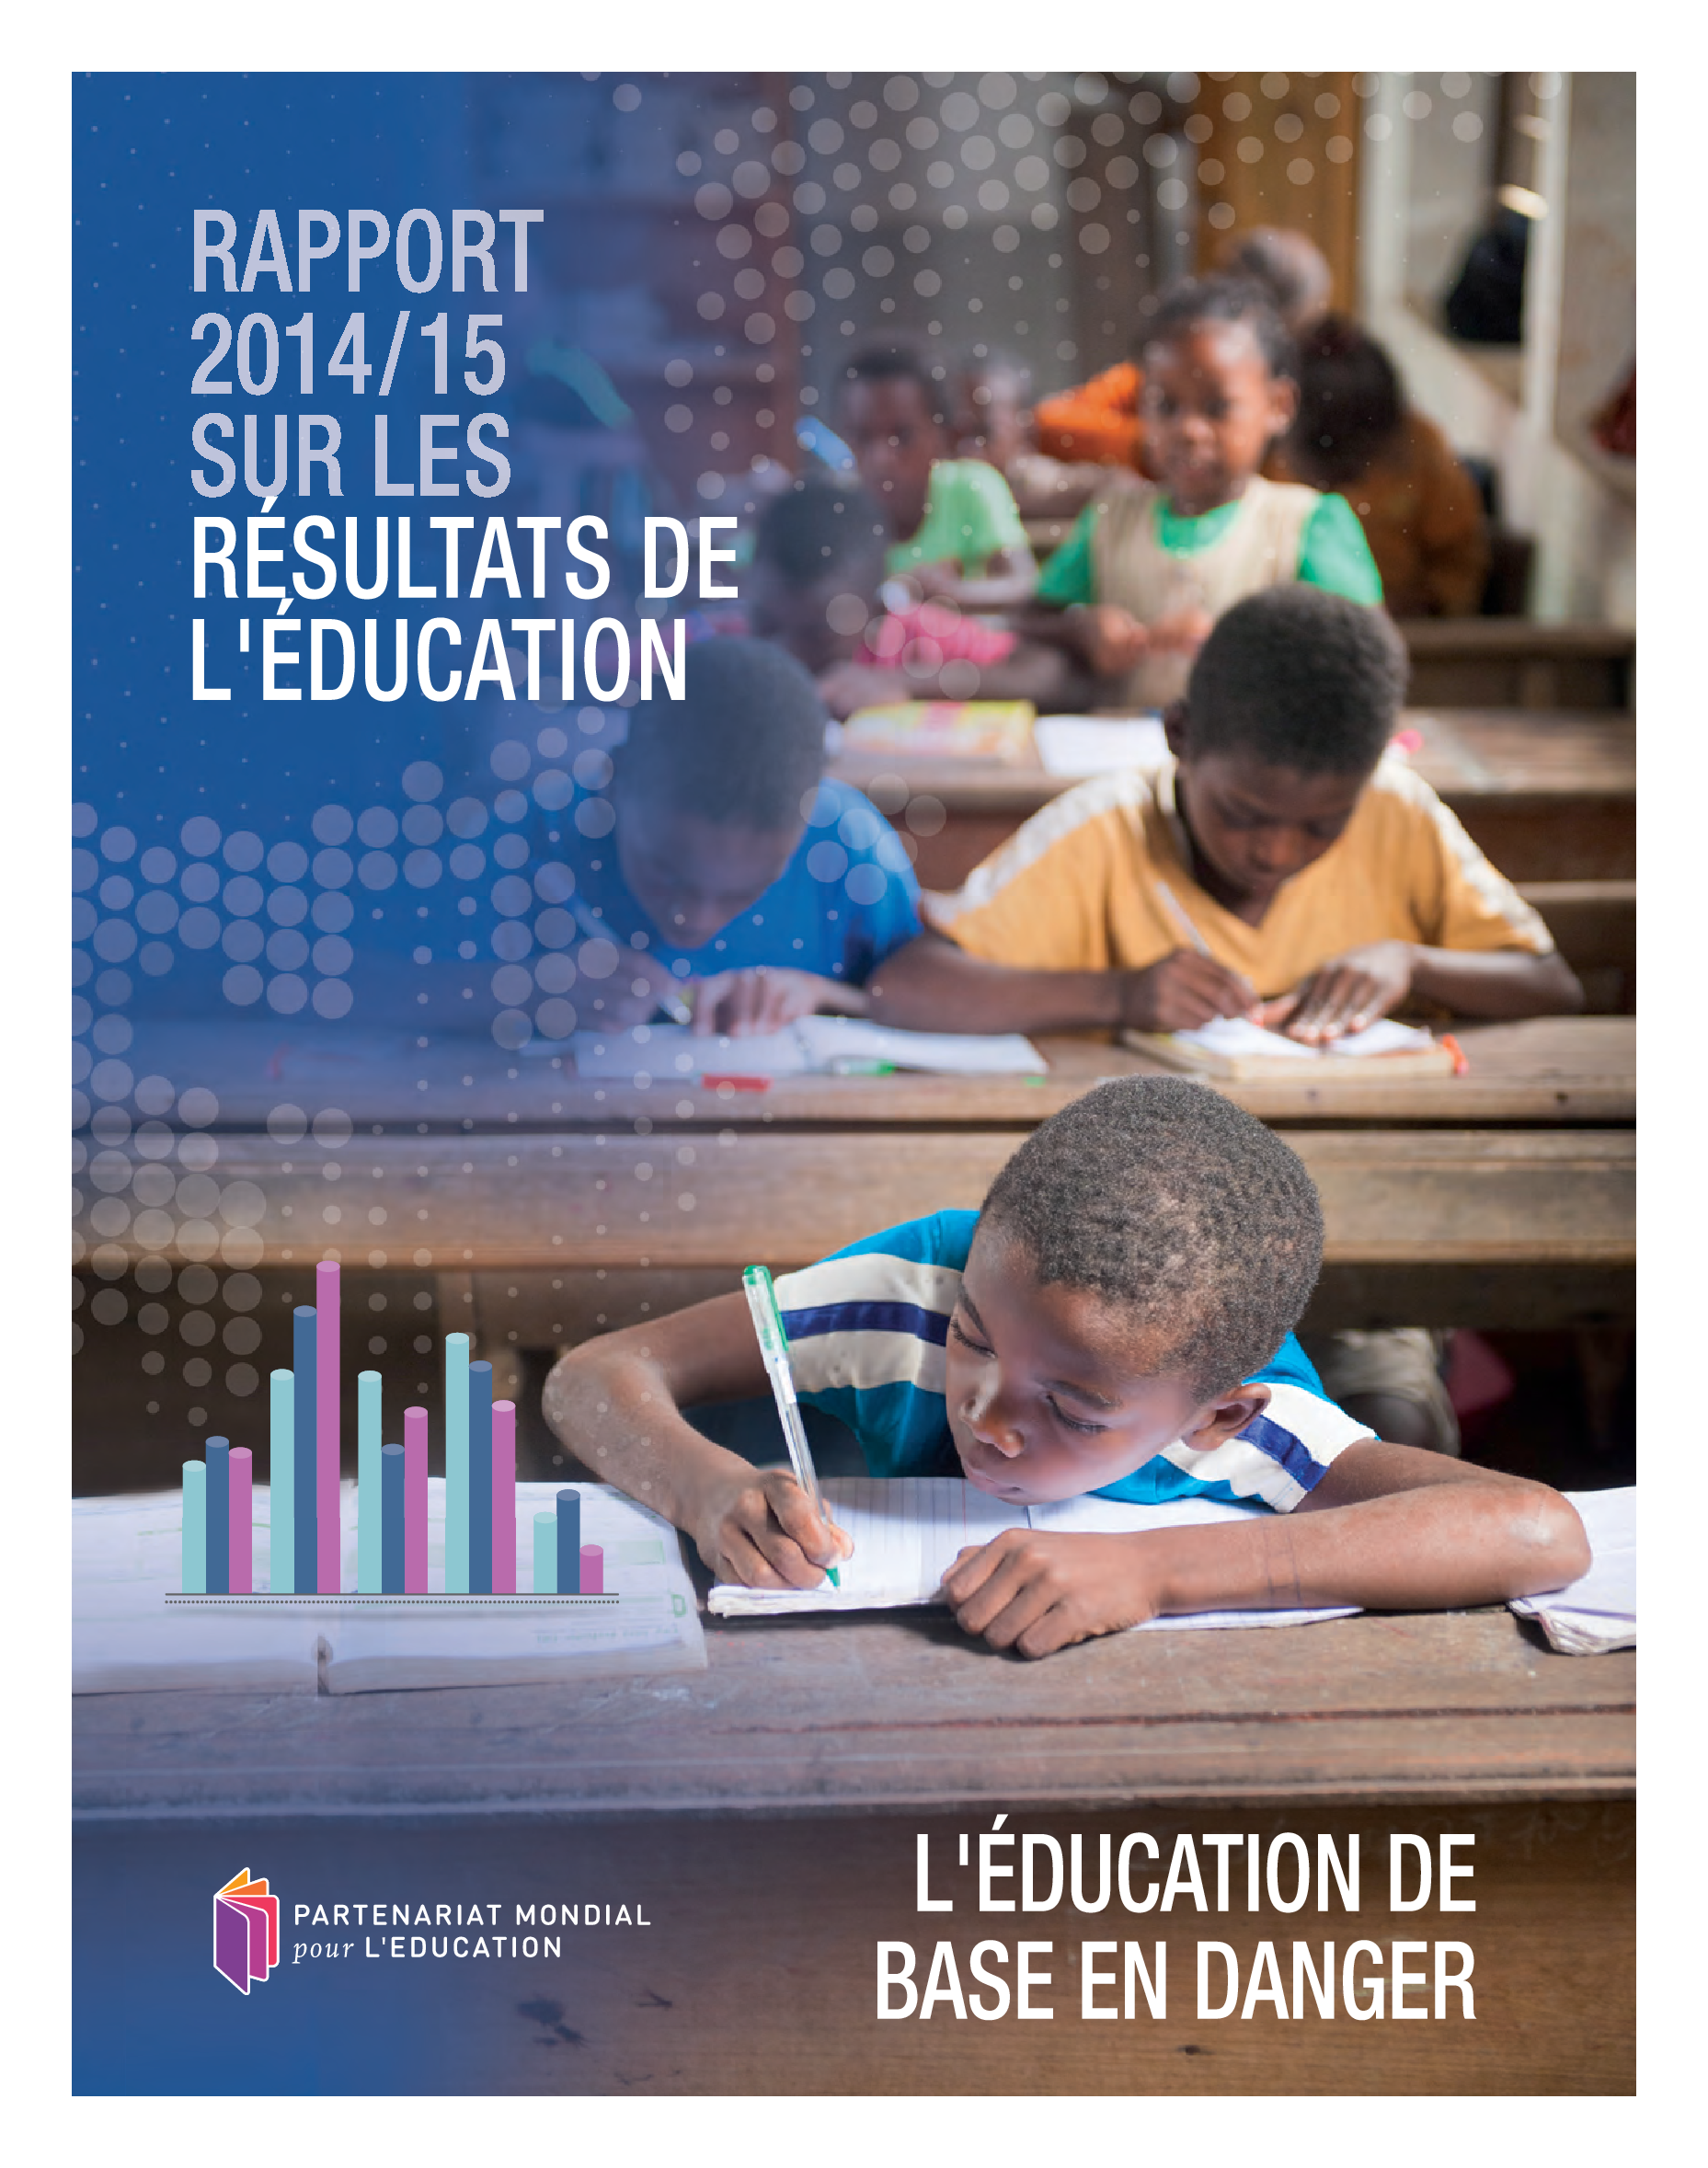 The 2014/2015 Results for Learning Report: Basic Education at Risk examines the progress achieved by GPE partner developing countries over the period 2008-2012.